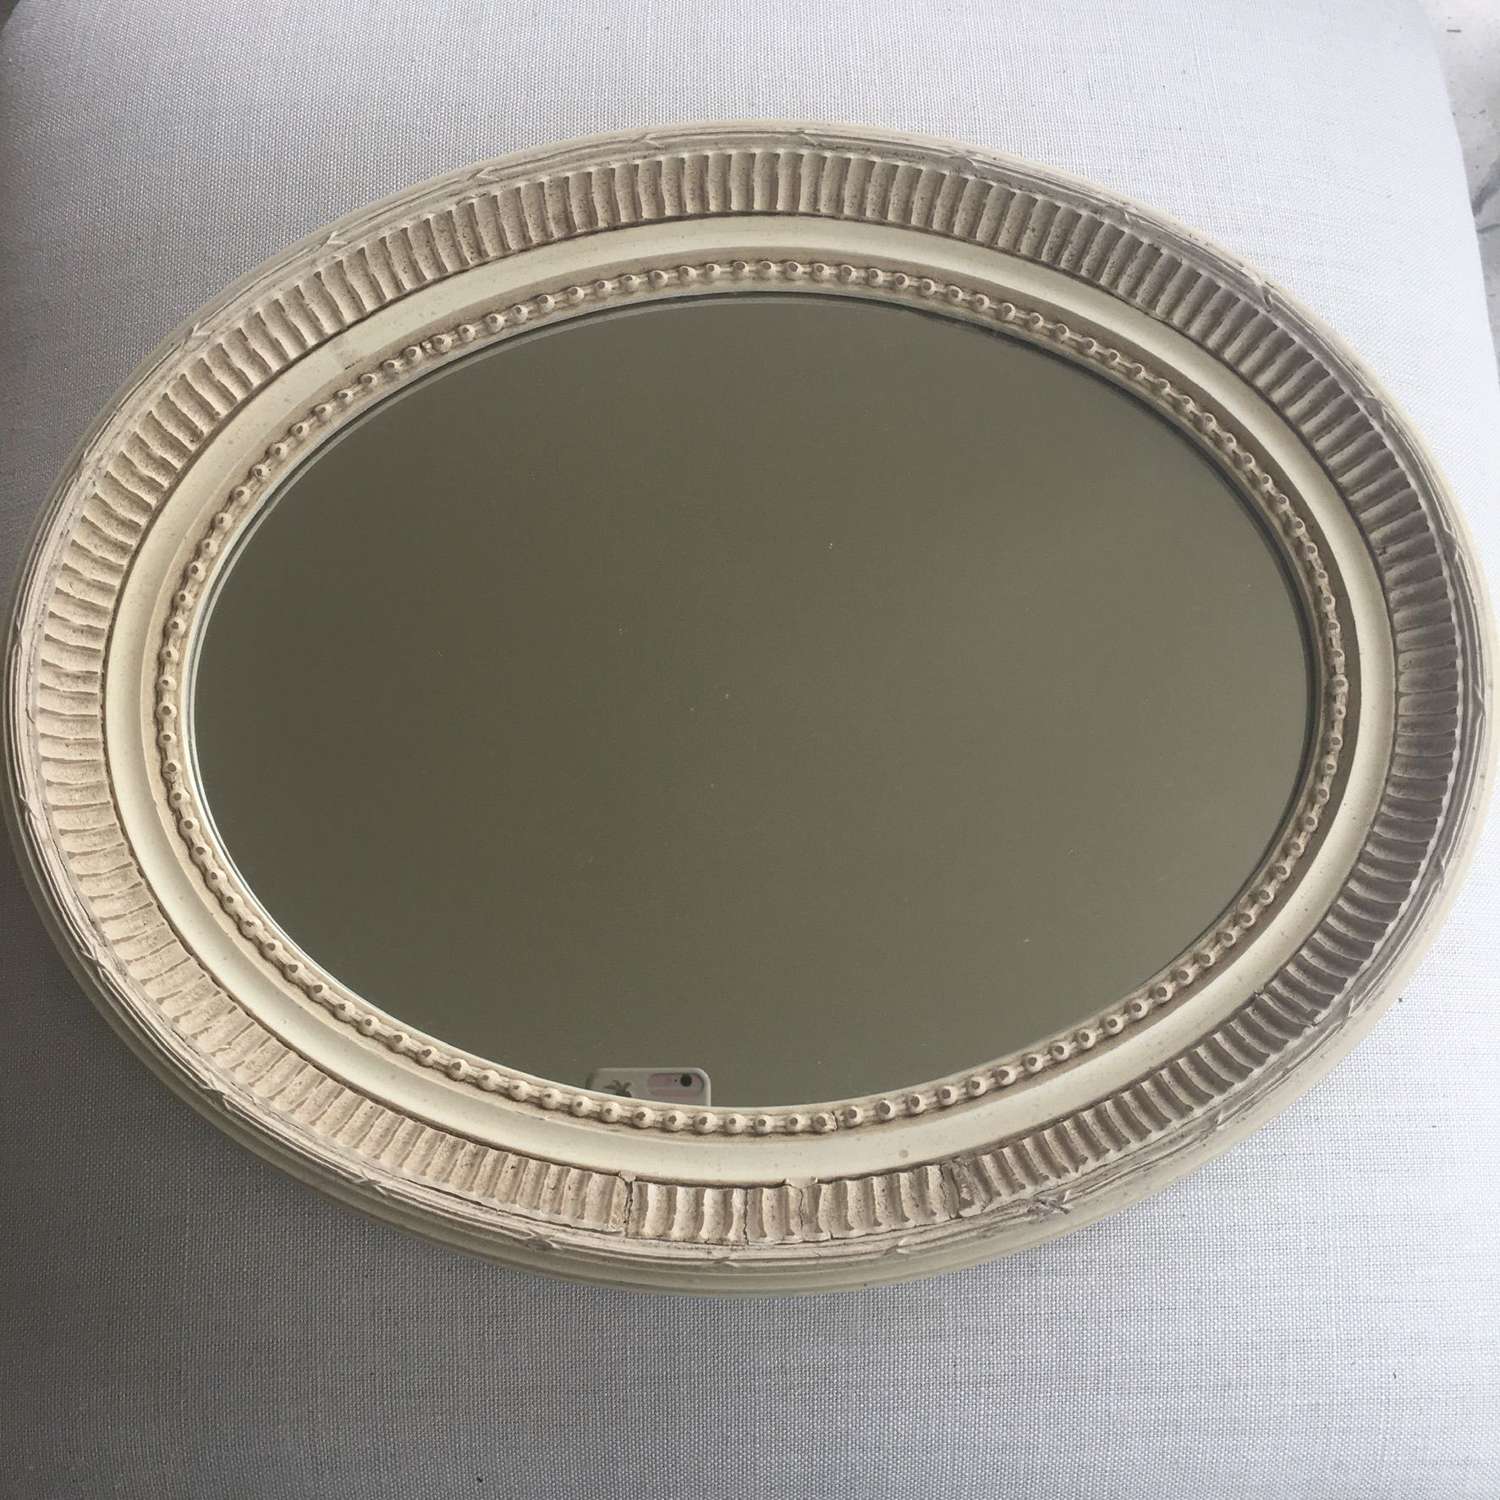 Oval cream wooden painted mirror